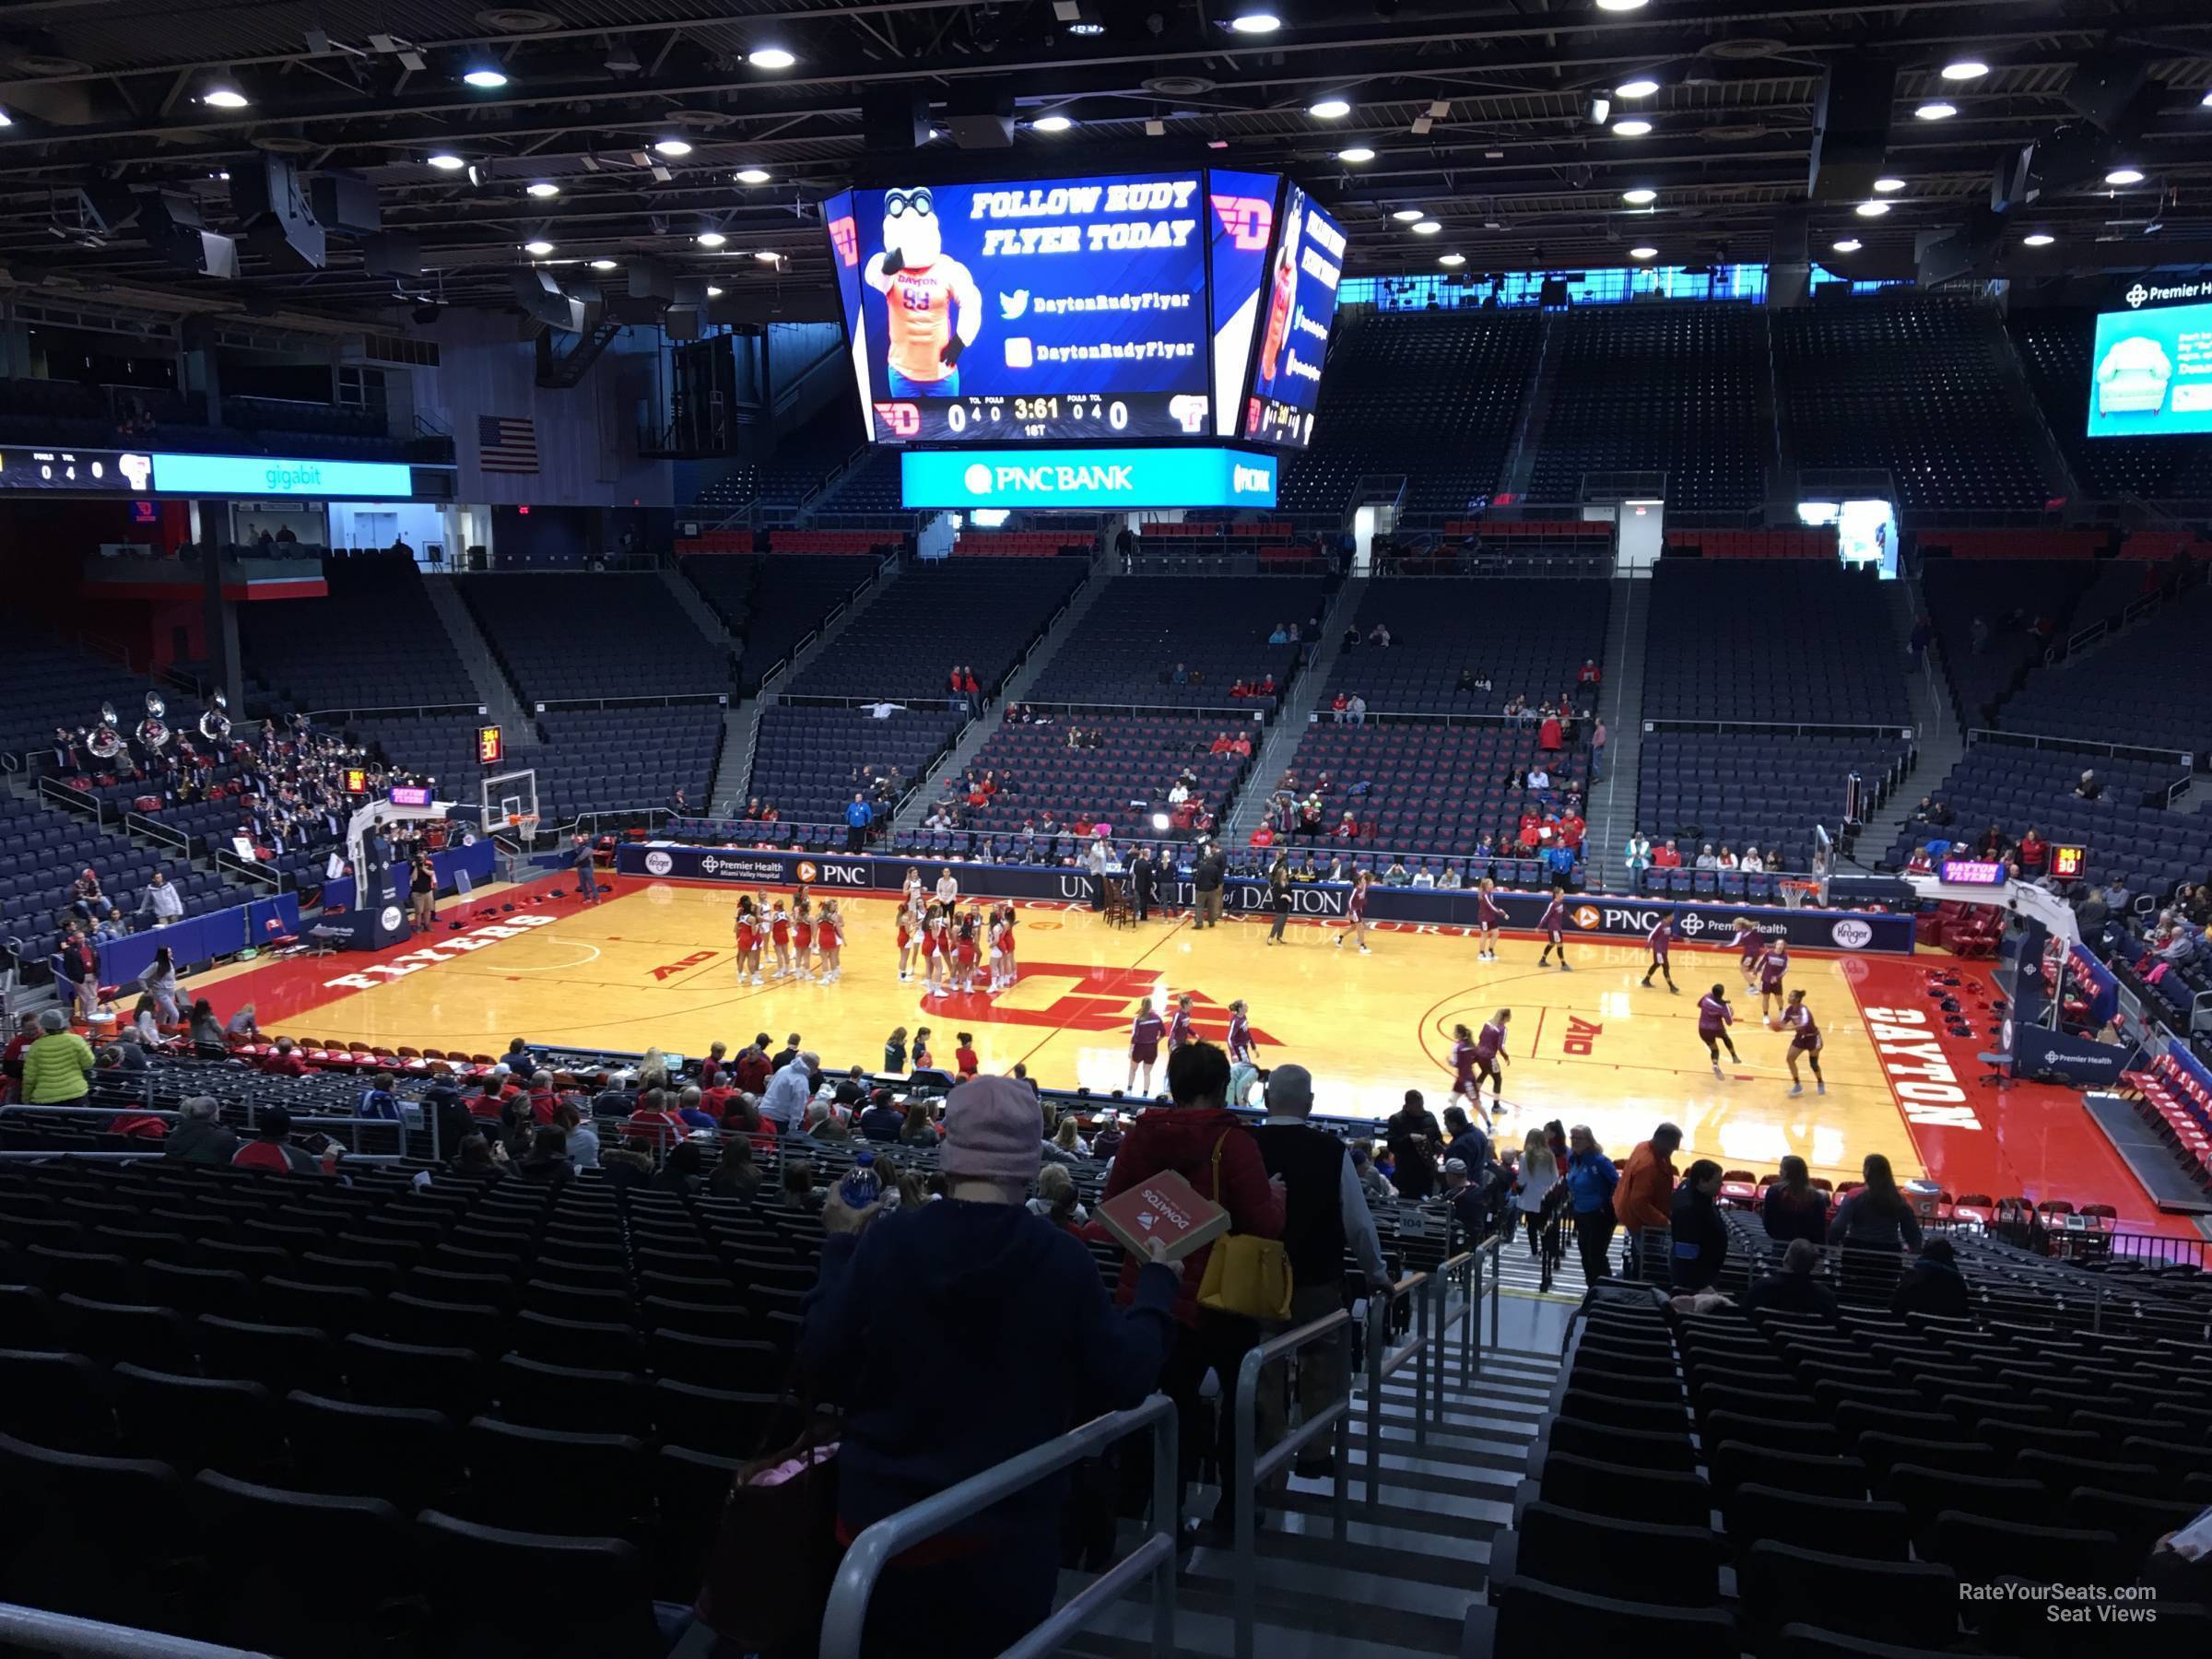 section 303, row a seat view  - university of dayton arena